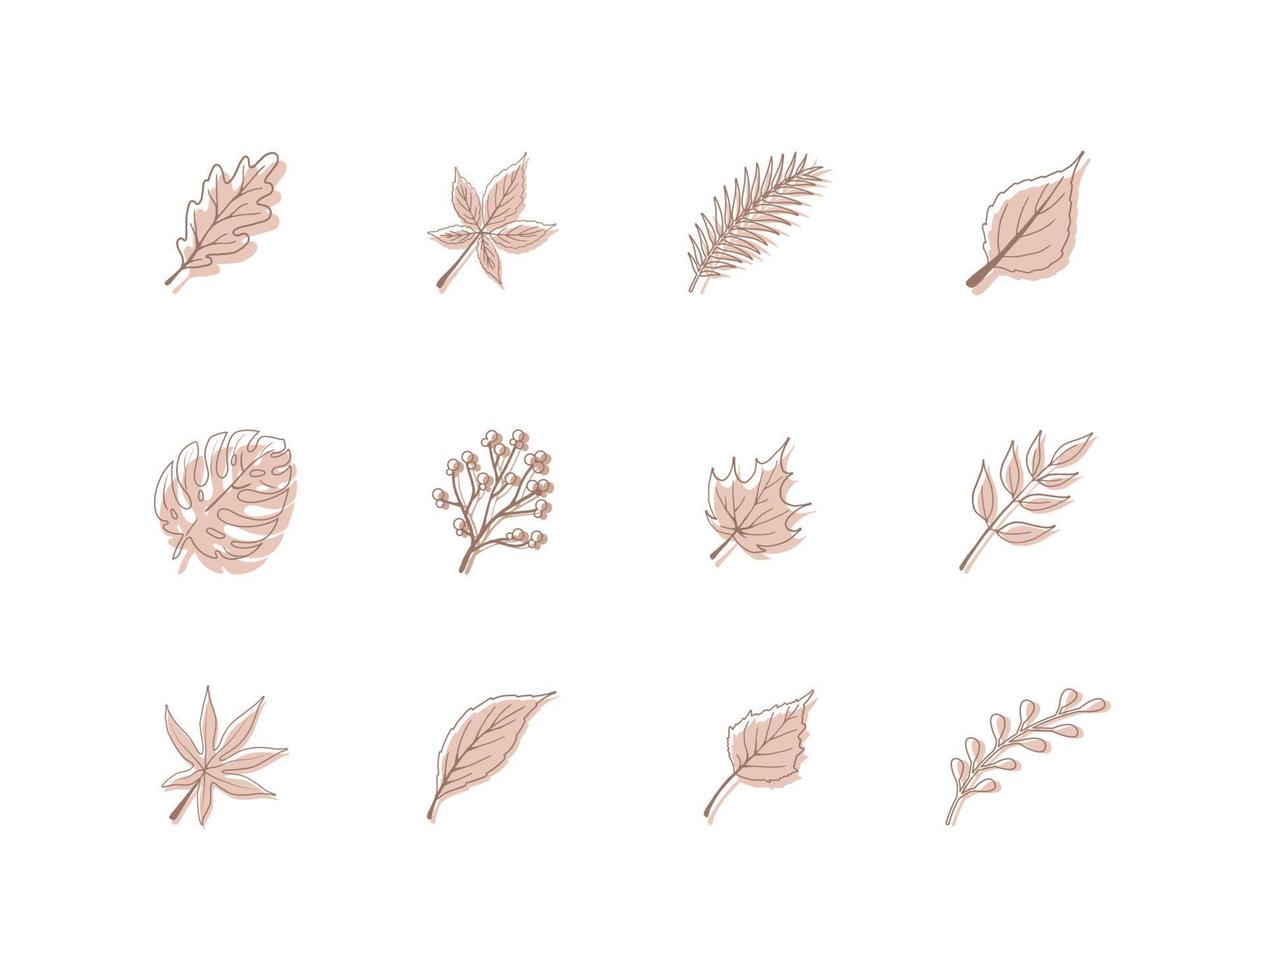 Abstract leaves. Minimalistic art in pastel colors. Design elements for wall art, social media, posters, stickers and invitations. Modern vector illustration in flat style